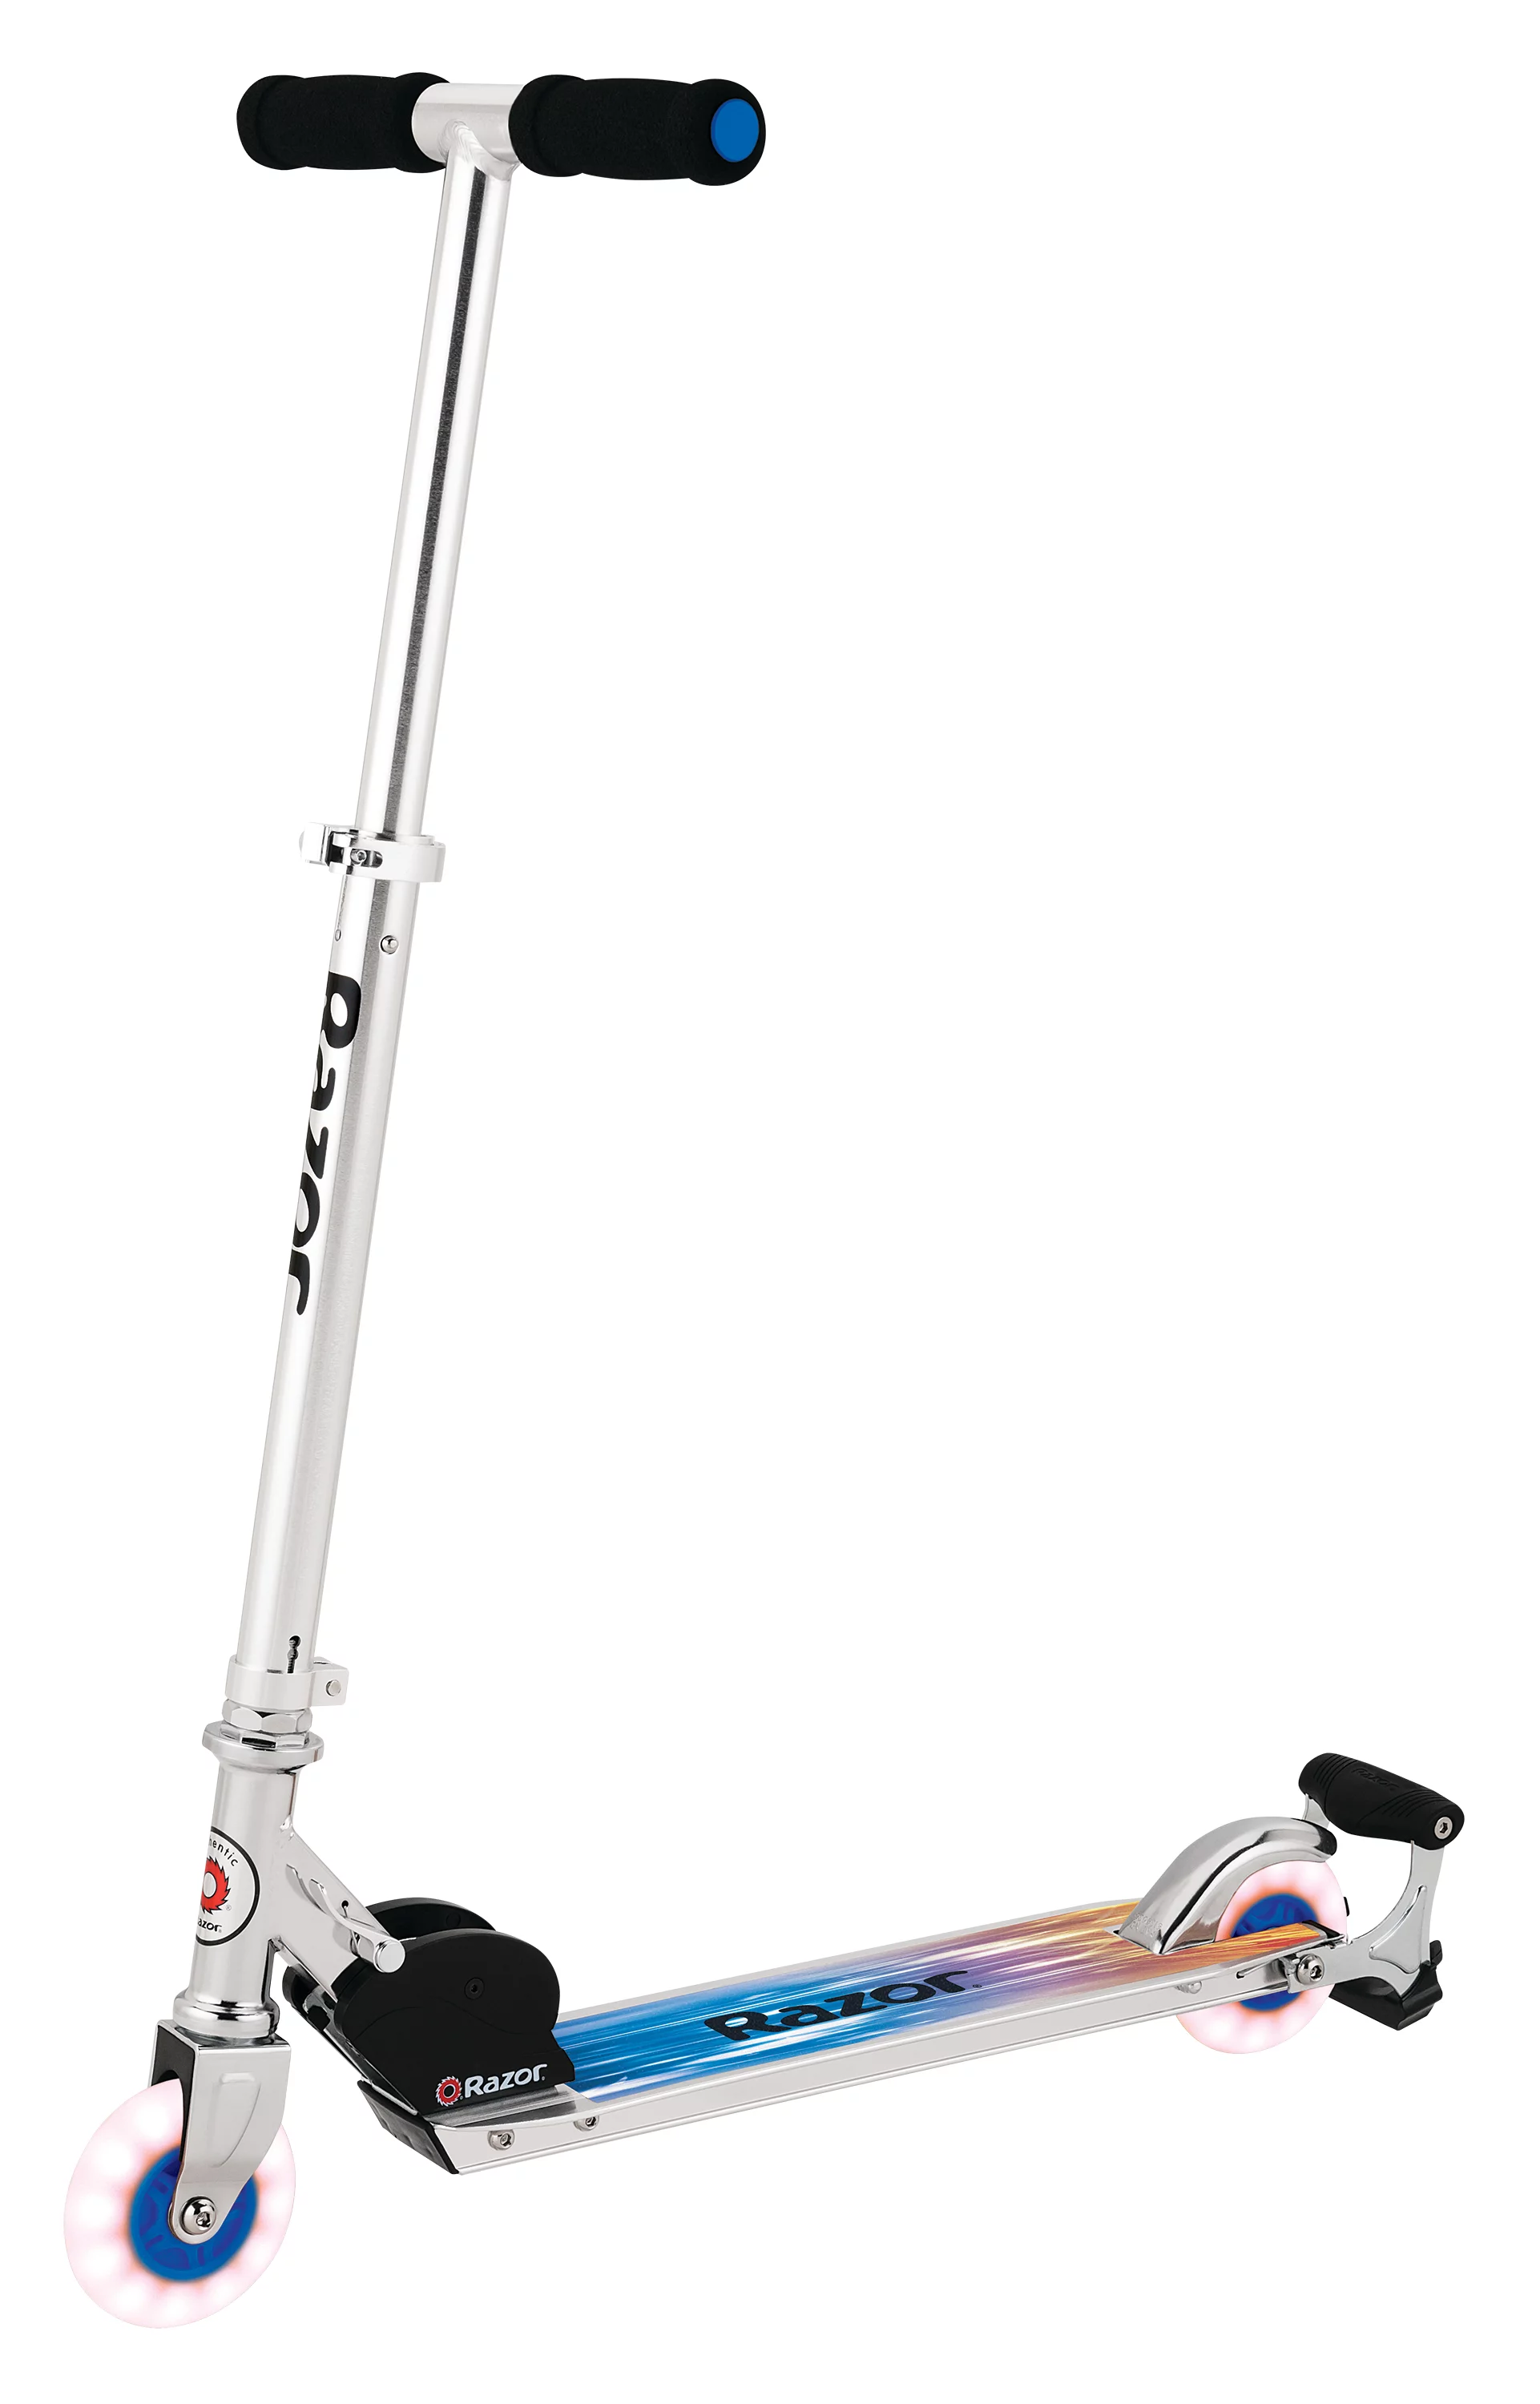 Razor Spark Ultra Kick Scooter with Super Bright LED Wheels Orange, Blue and Red